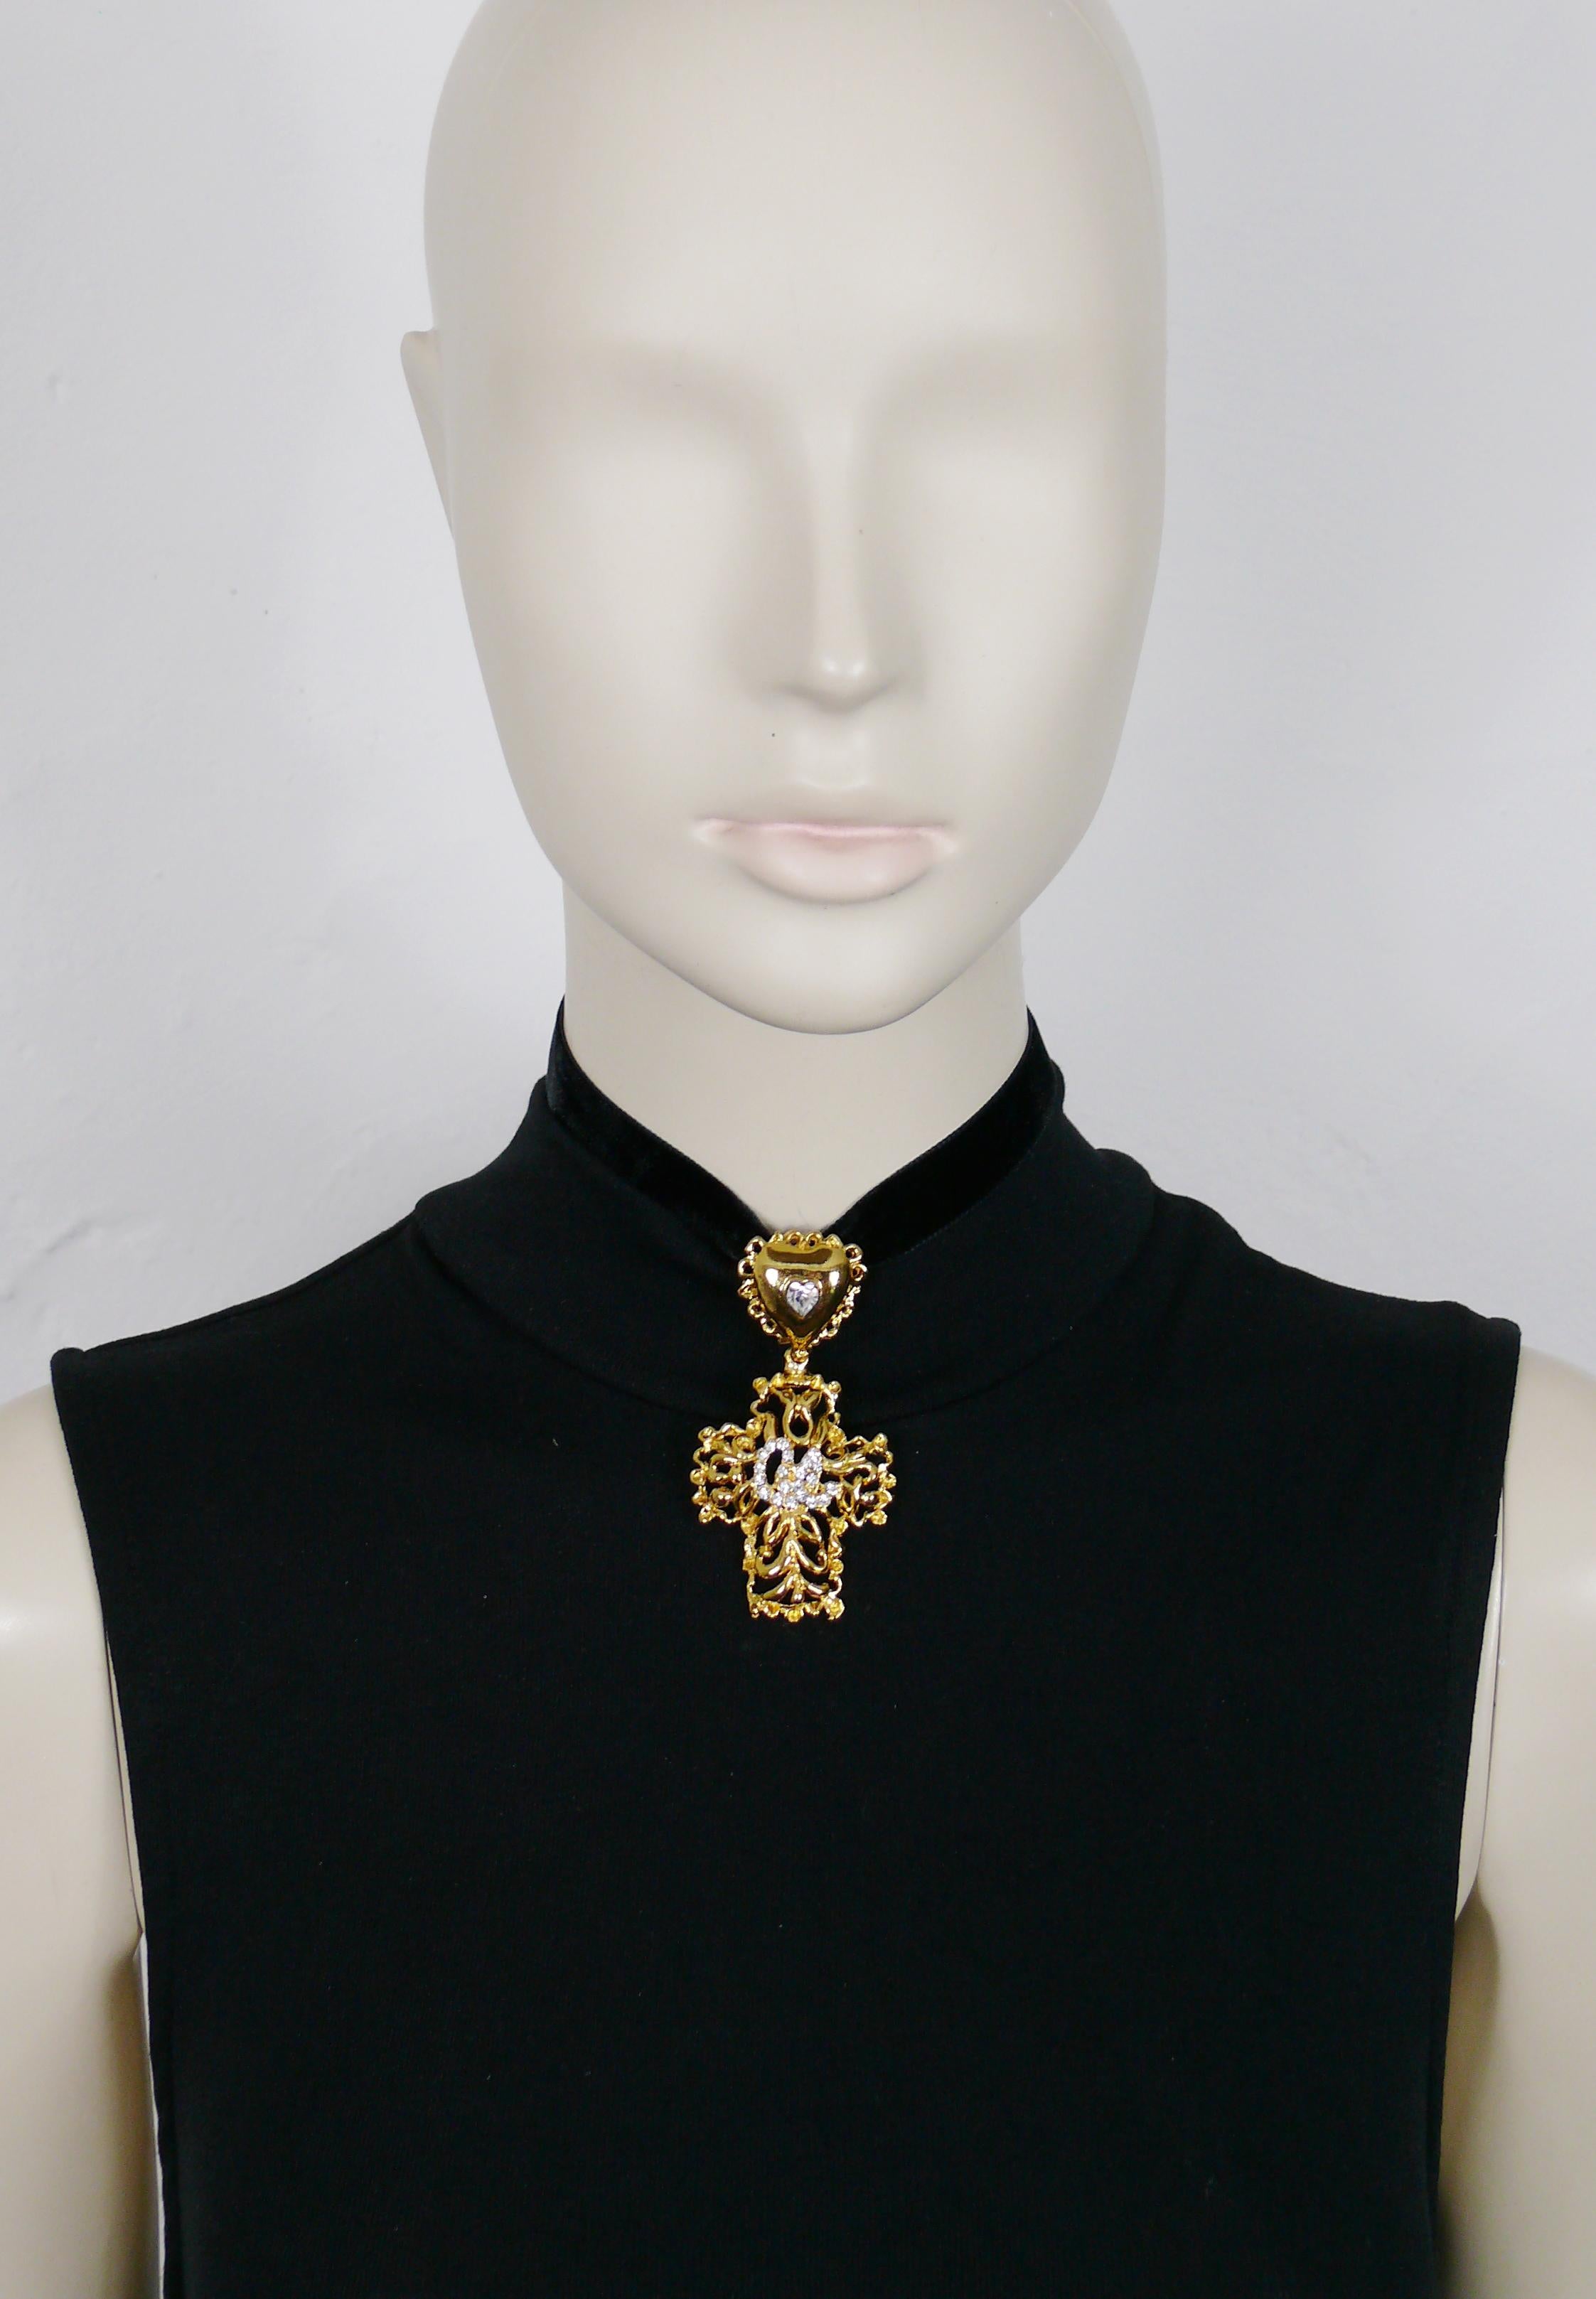 CHRISTIAN LACROIX vintage gold toned openwork cross pendant featuring the CL monogram embellished with clear crystals, topped by a jewelled heart bail.

Comes with a black velvet ribbon (ties at back).

Marked CHRISTIAN LACROIX CL Made in